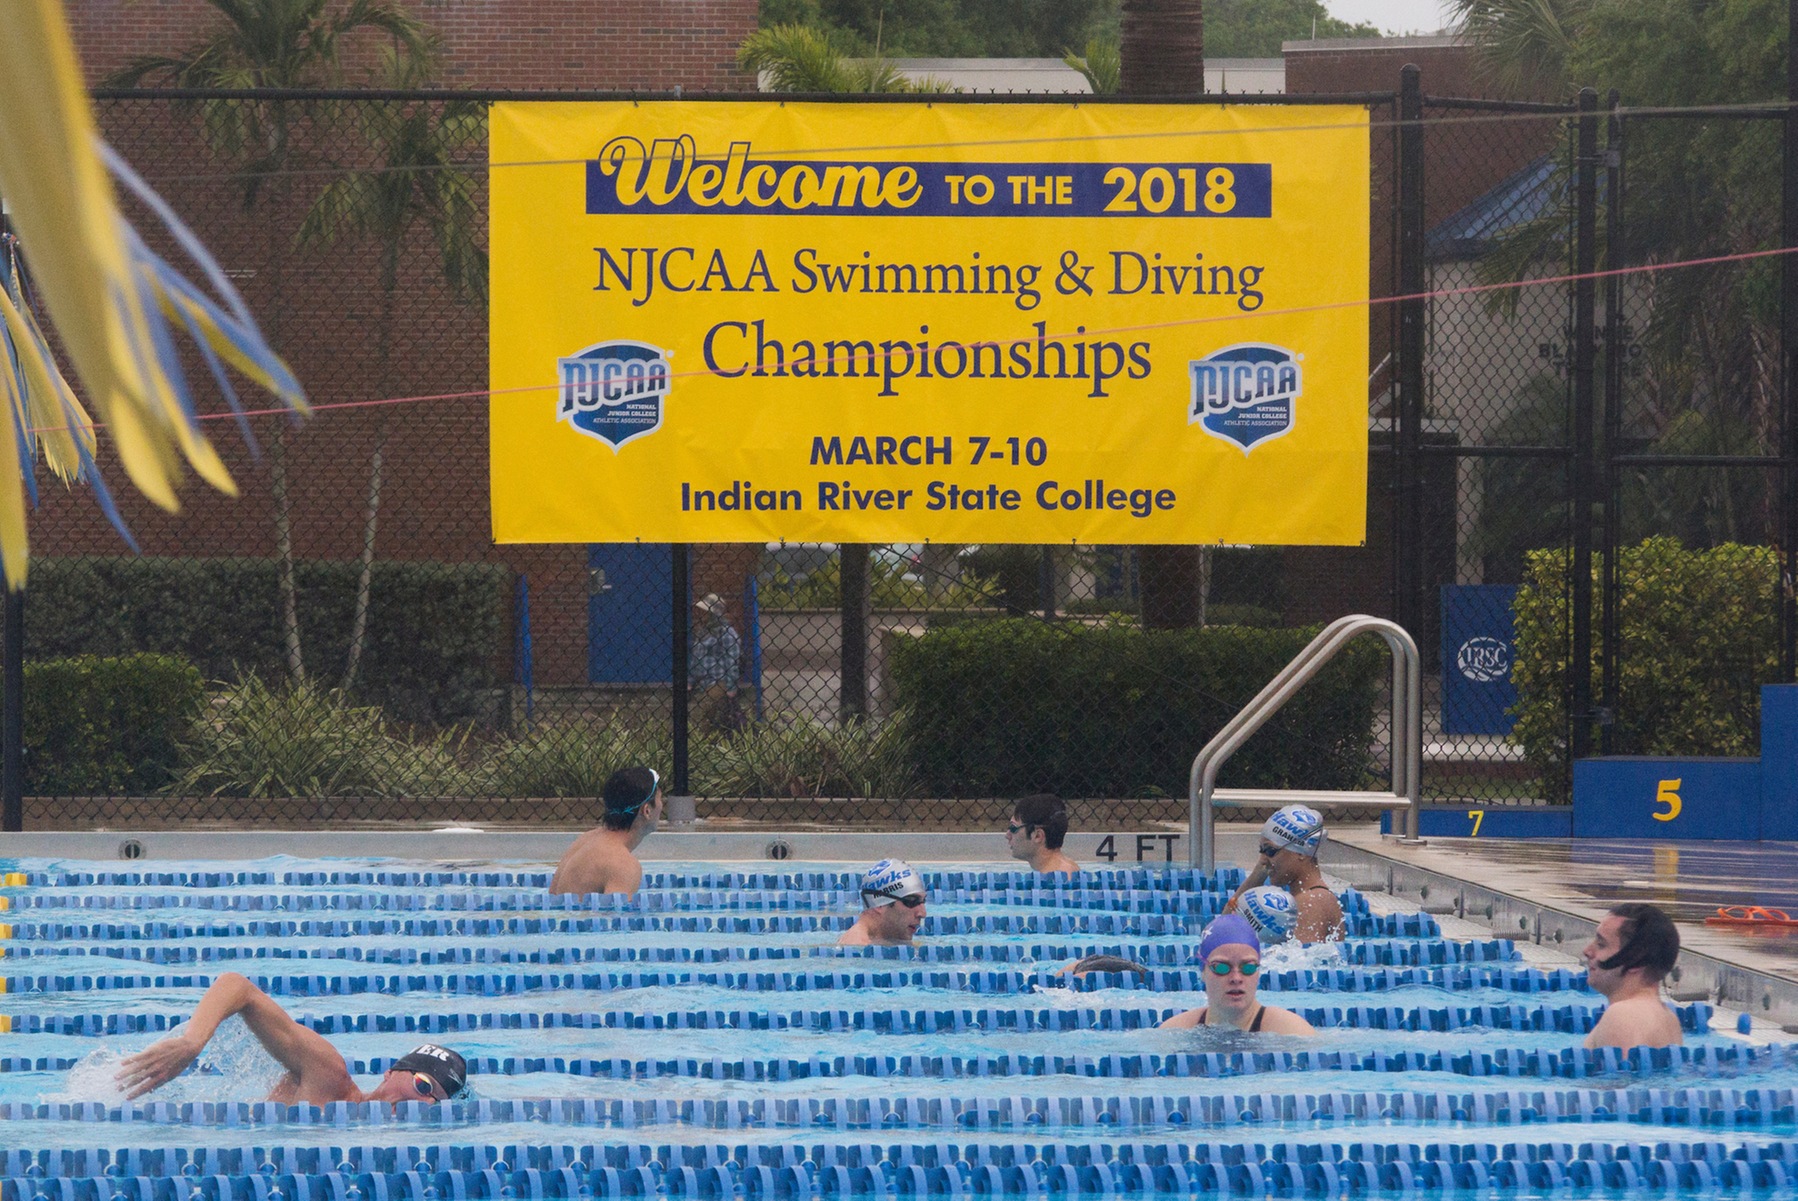 Sule Van Der Merwe Sets NJCAA 1000 Record at Day One of NCJAA Championship